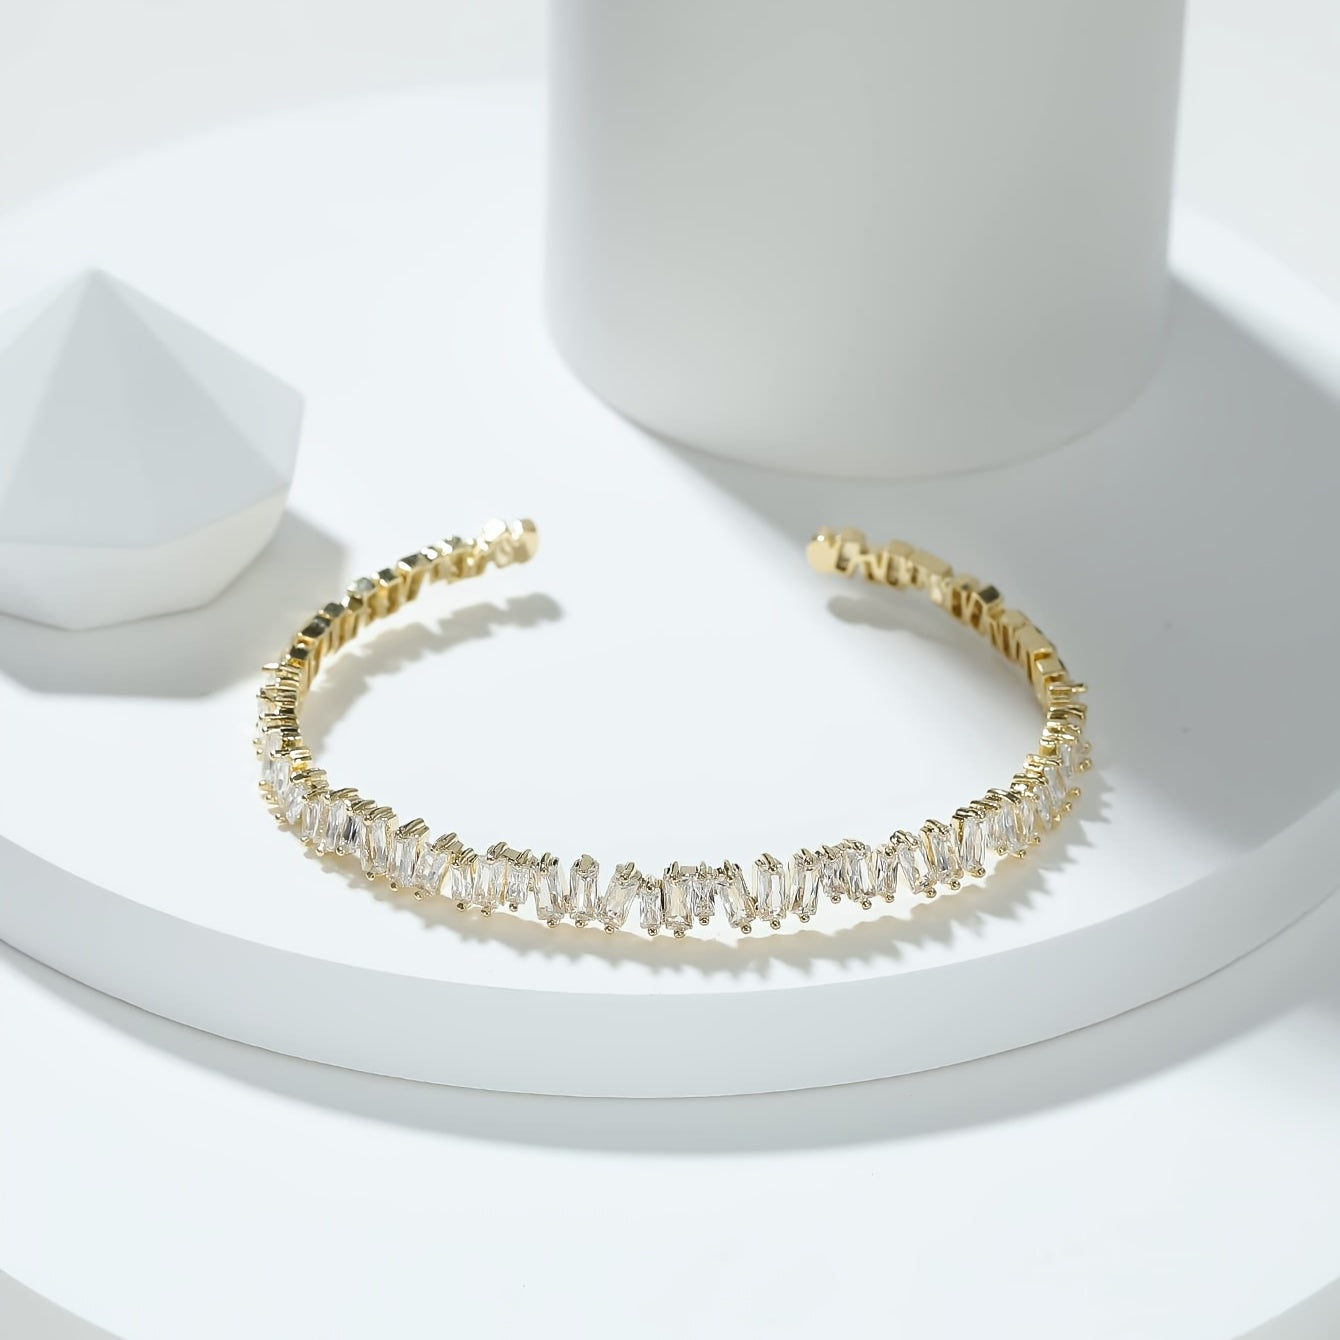 Gorgeous Gold Geometric Bracelet with Zircon - Perfect for Weddings & Engagements!